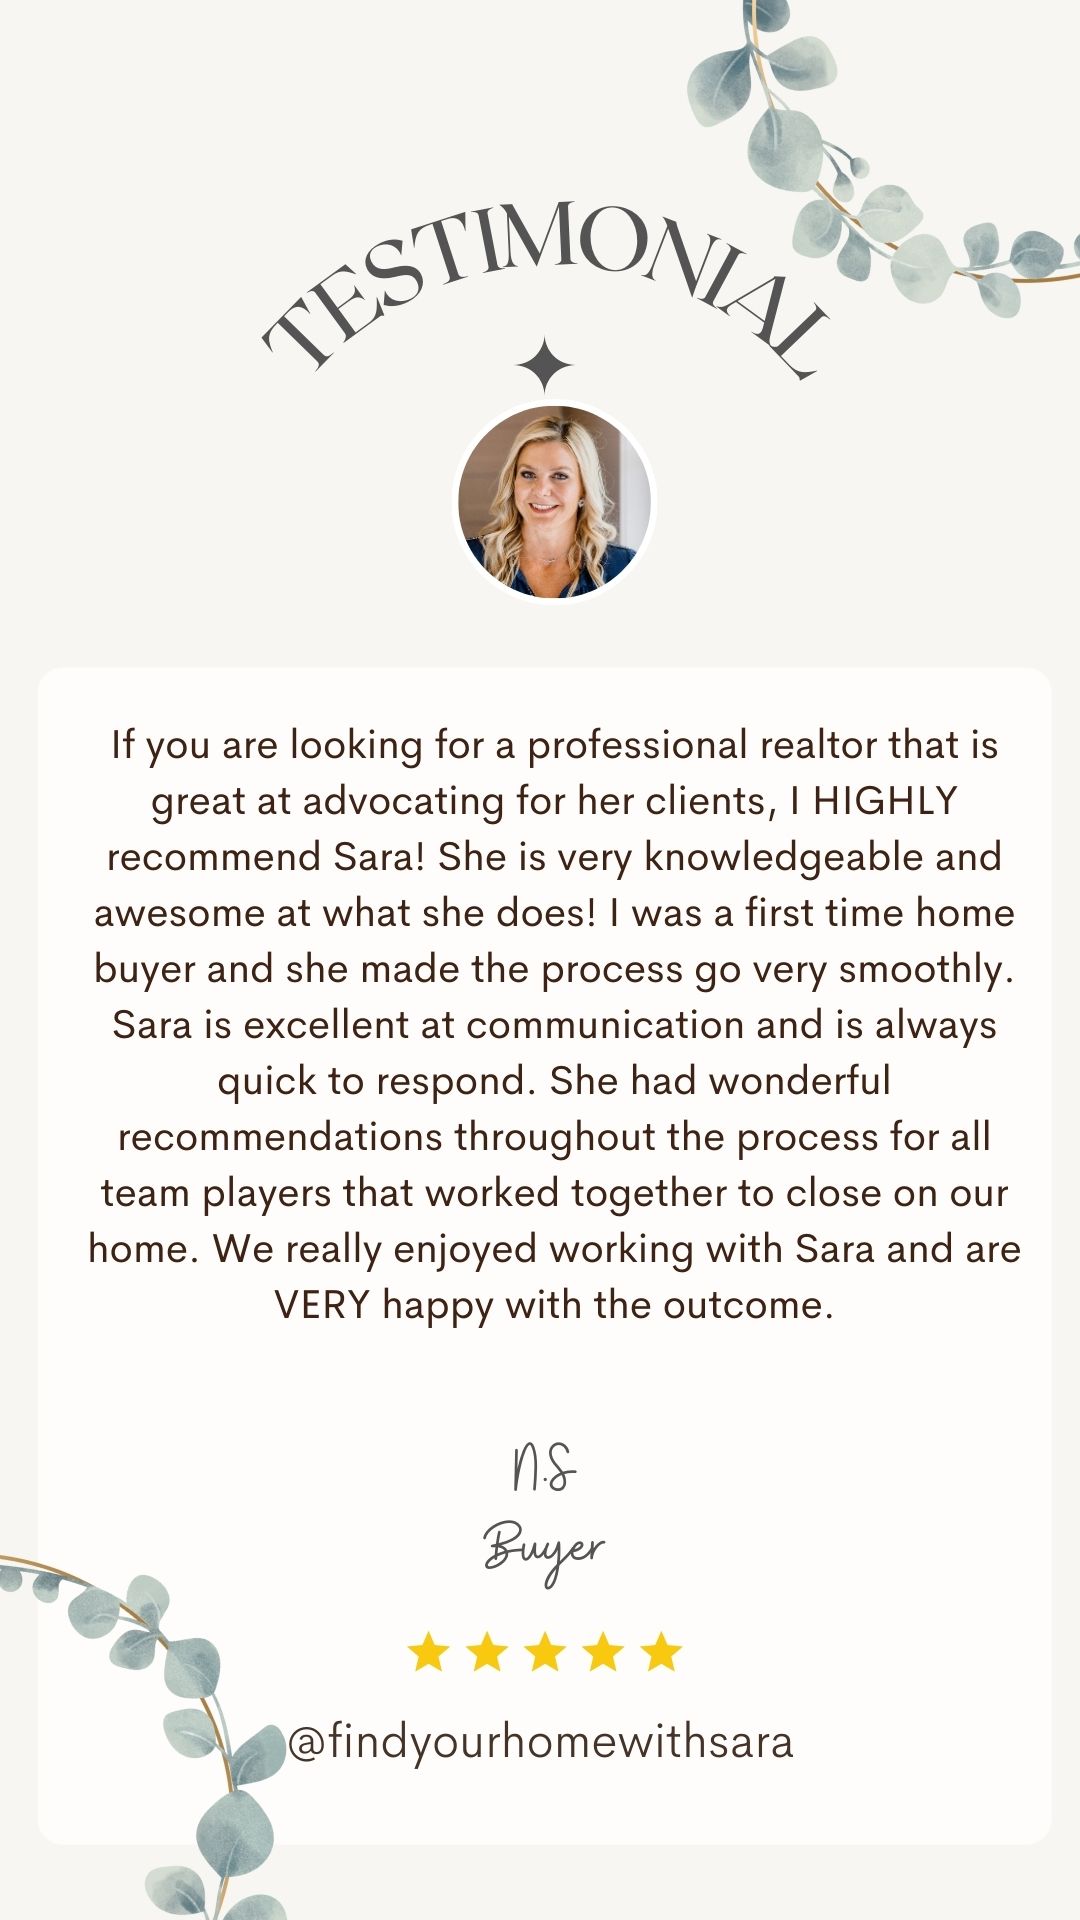 If you are looking for a professional realtor that is great at advocating for her clients, I HIGHLY recommend Sara! She is very knowledgeable and awesome at what she does! I was a first time home buyer and she made the process go very smoothly. Sara is excellent at communication and is always quick to respond. She had wonderful recommendations throughout the process for all team players that worked together to close on our home. We really enjoyed working with Sara and are VERY happy with the outcome.